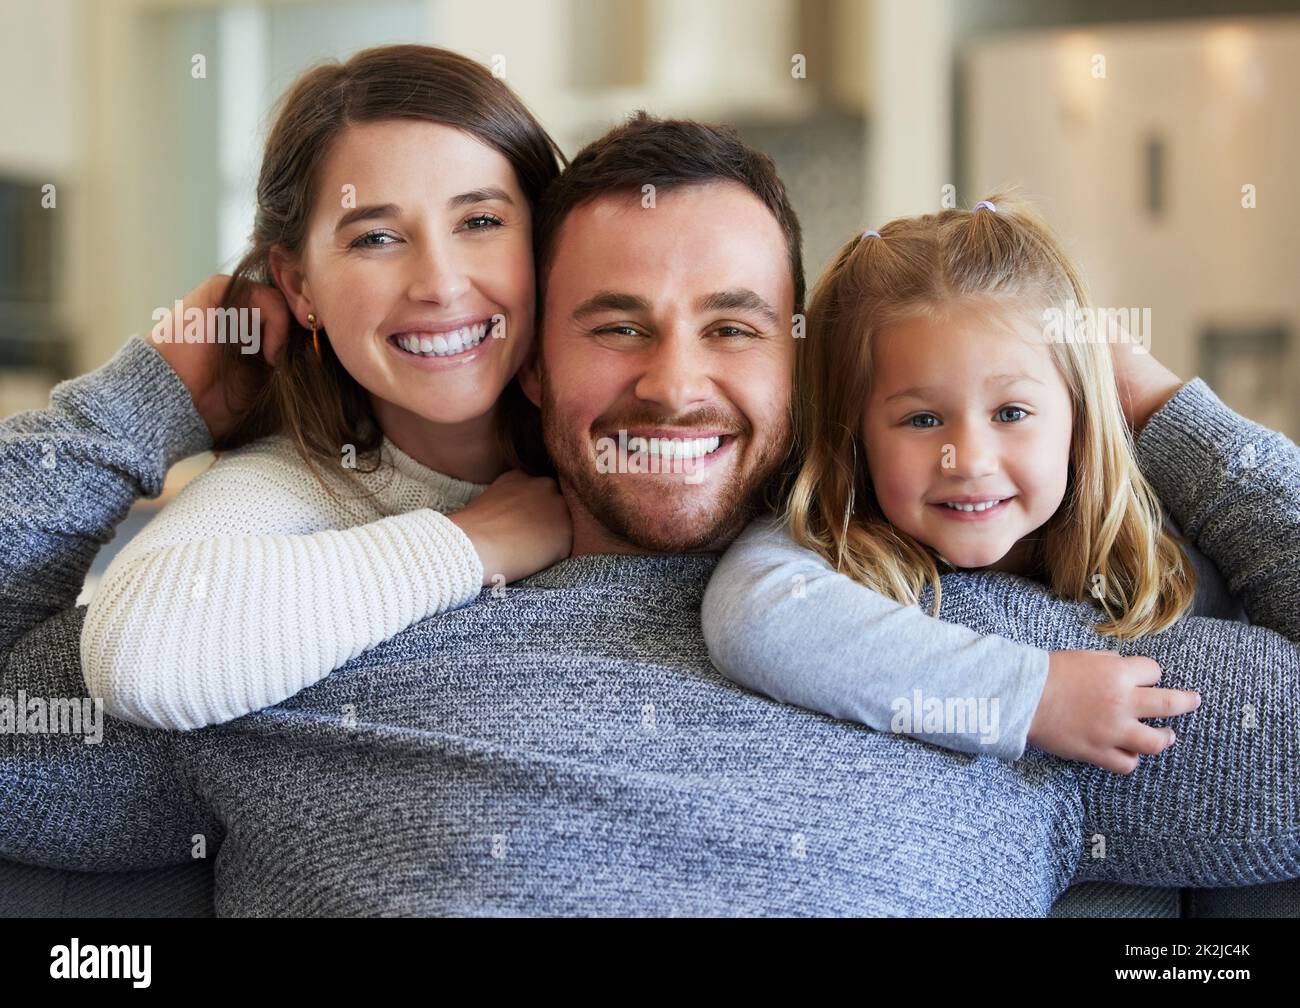 Love lives here. Shot of a young family relaxing on the couch at home. Stock Photo